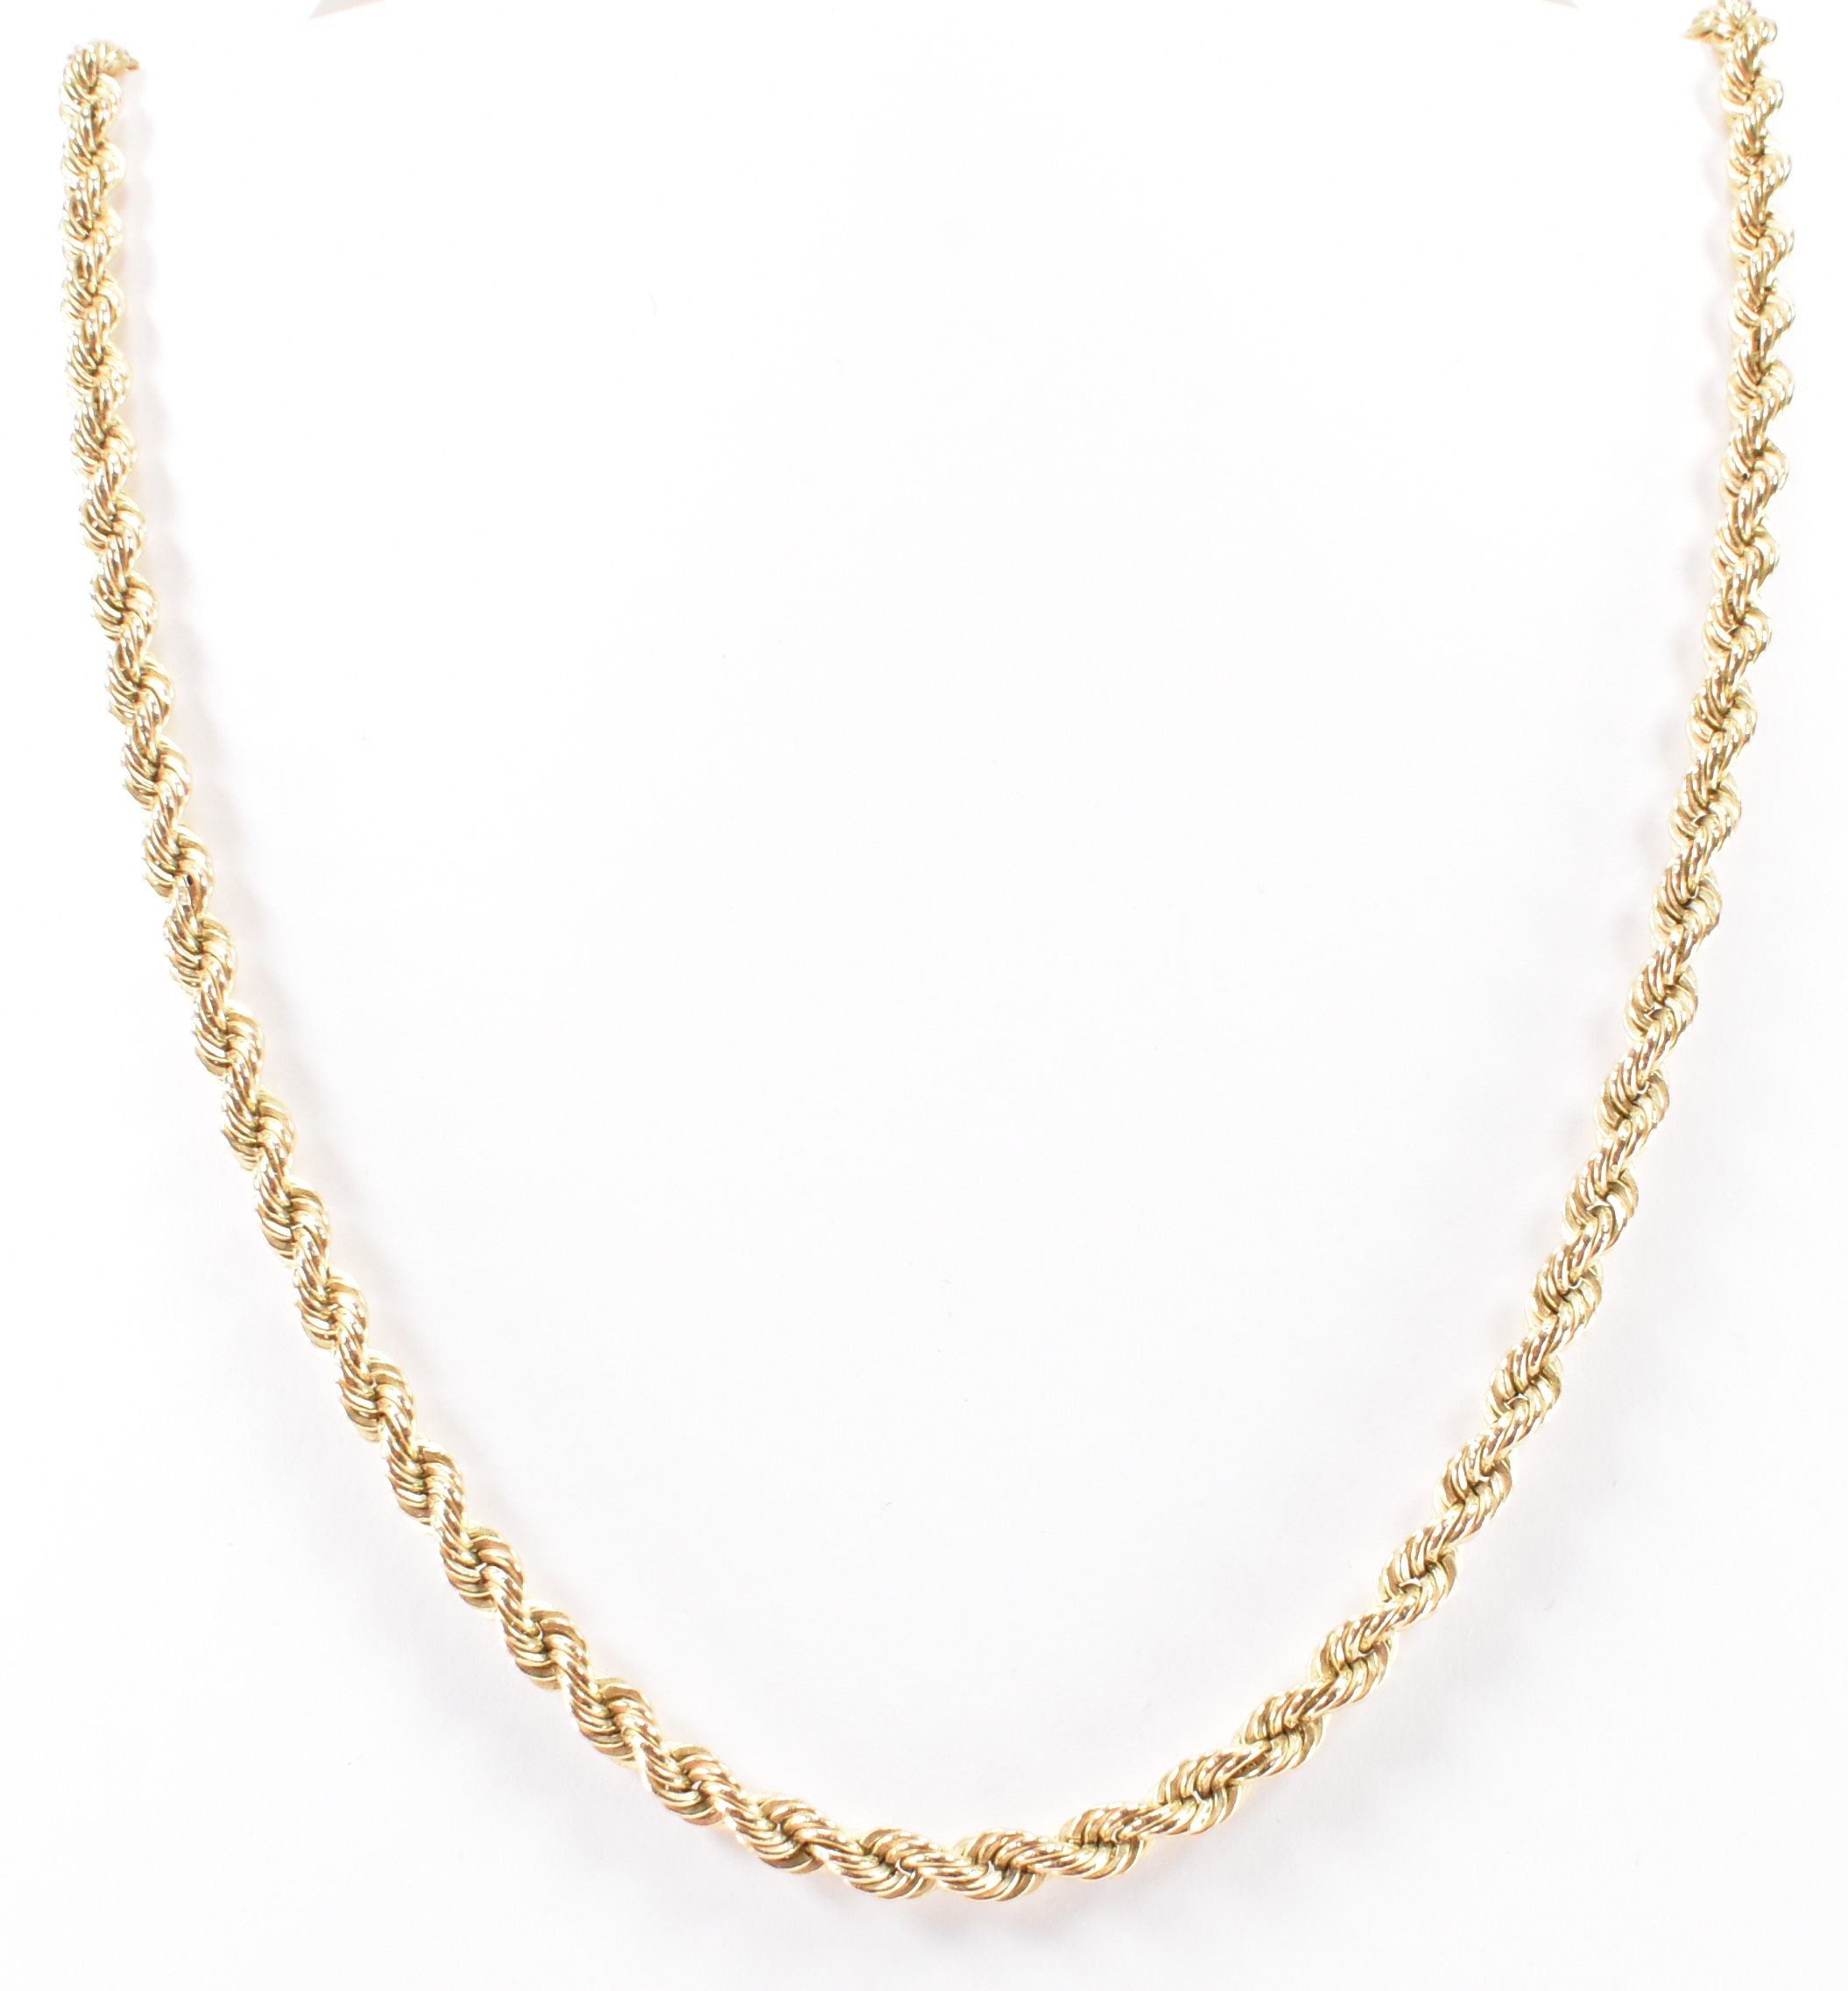 GOLD SINGPORE CHAIN NECKLACE